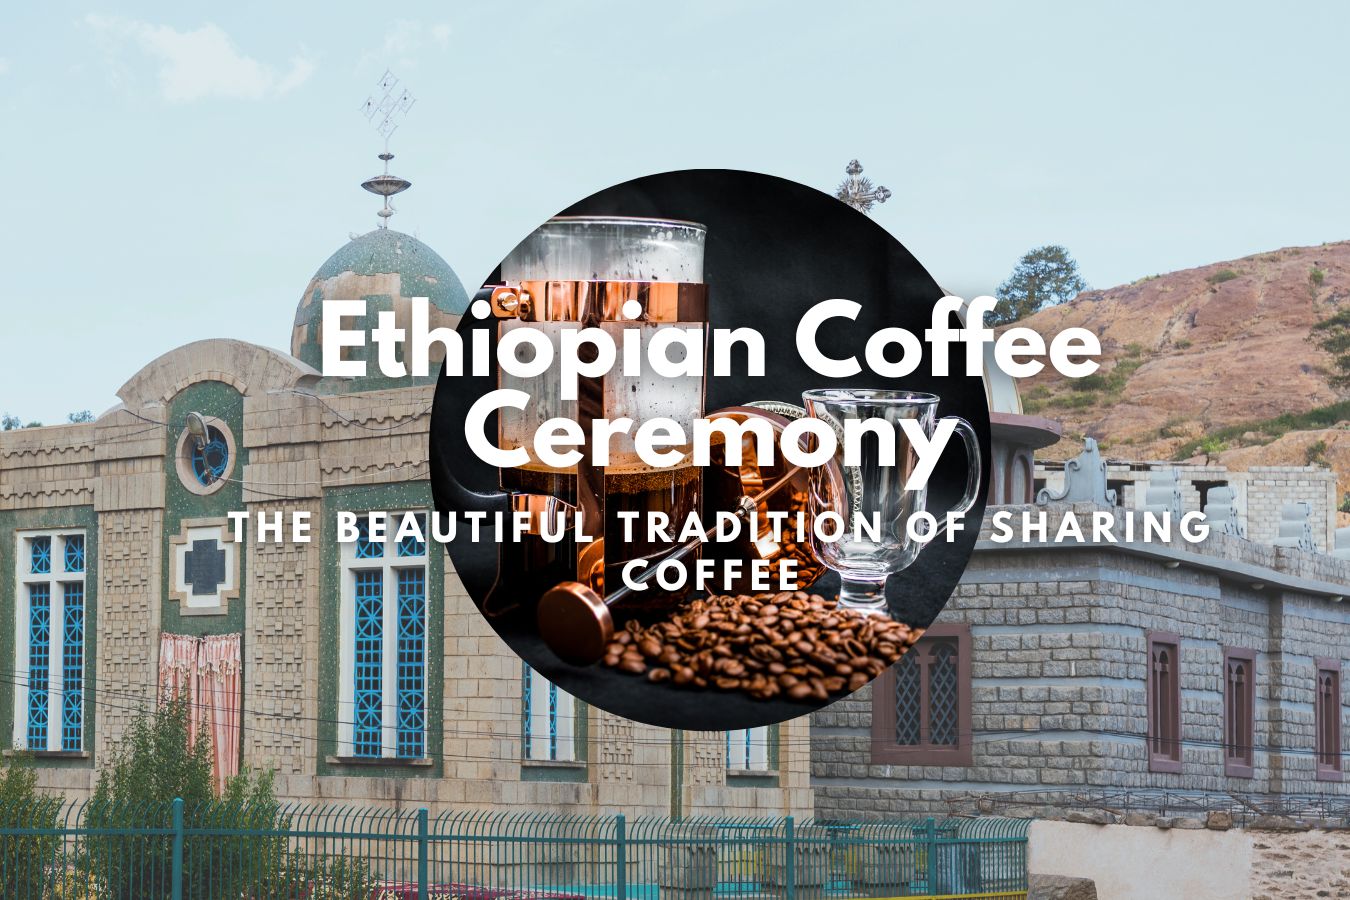 Ethiopian Coffee Ceremony The Beautiful Tradition of Sharing Coffee